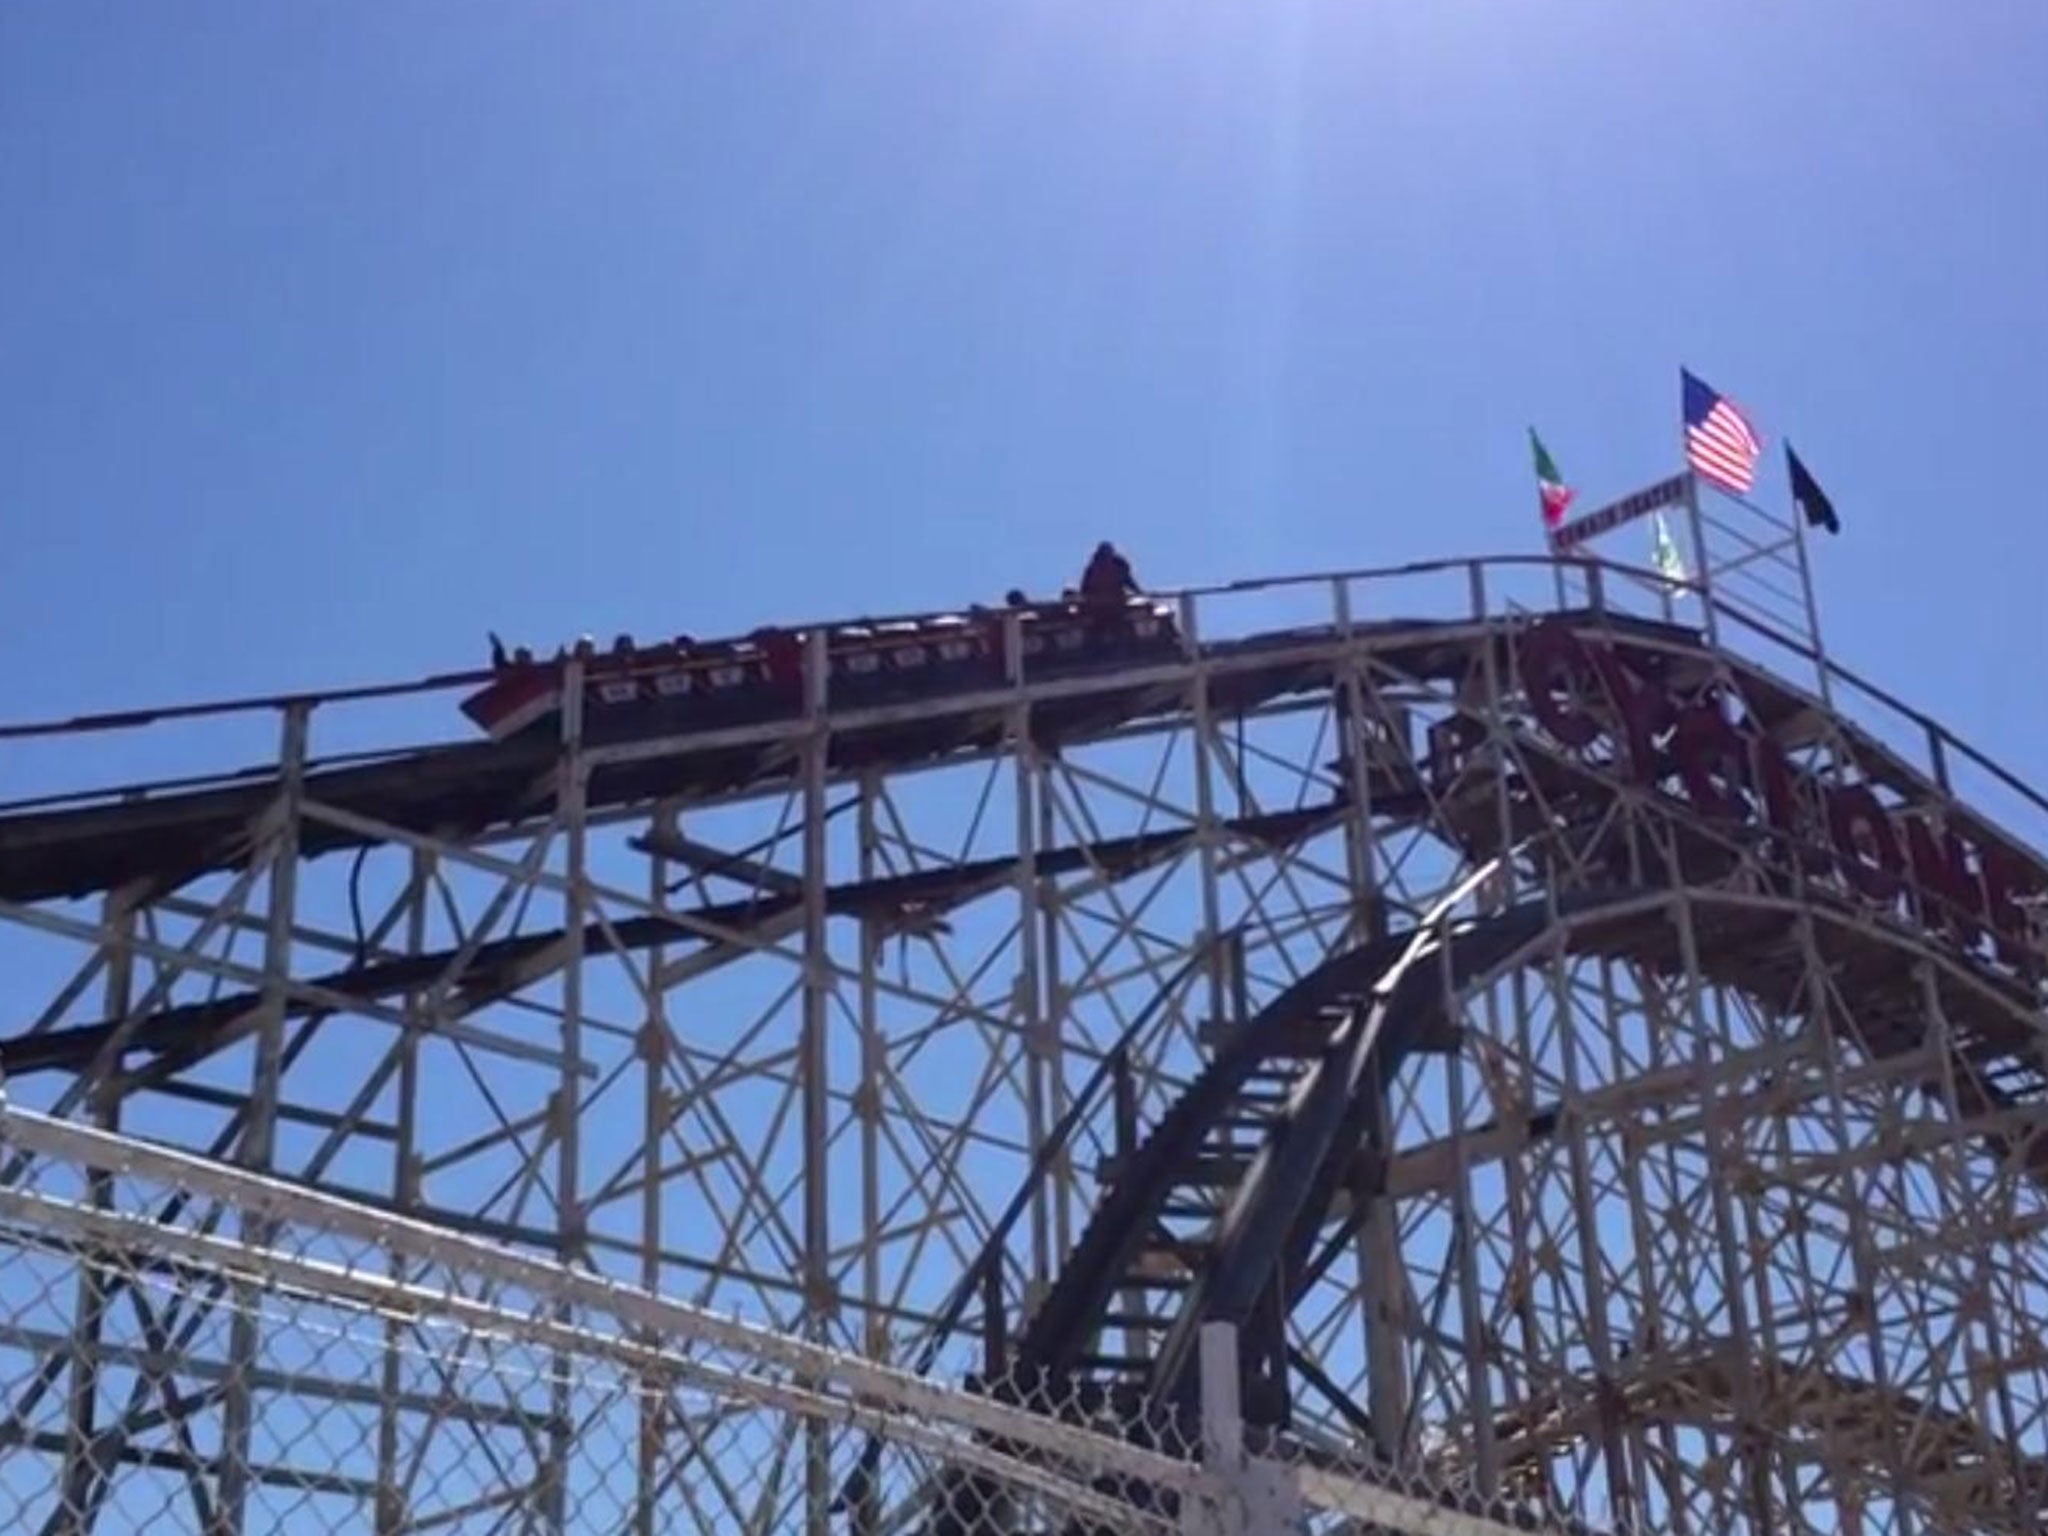 Stuck riders had to climb down the track of the Coney Island cyclone rollercoaster